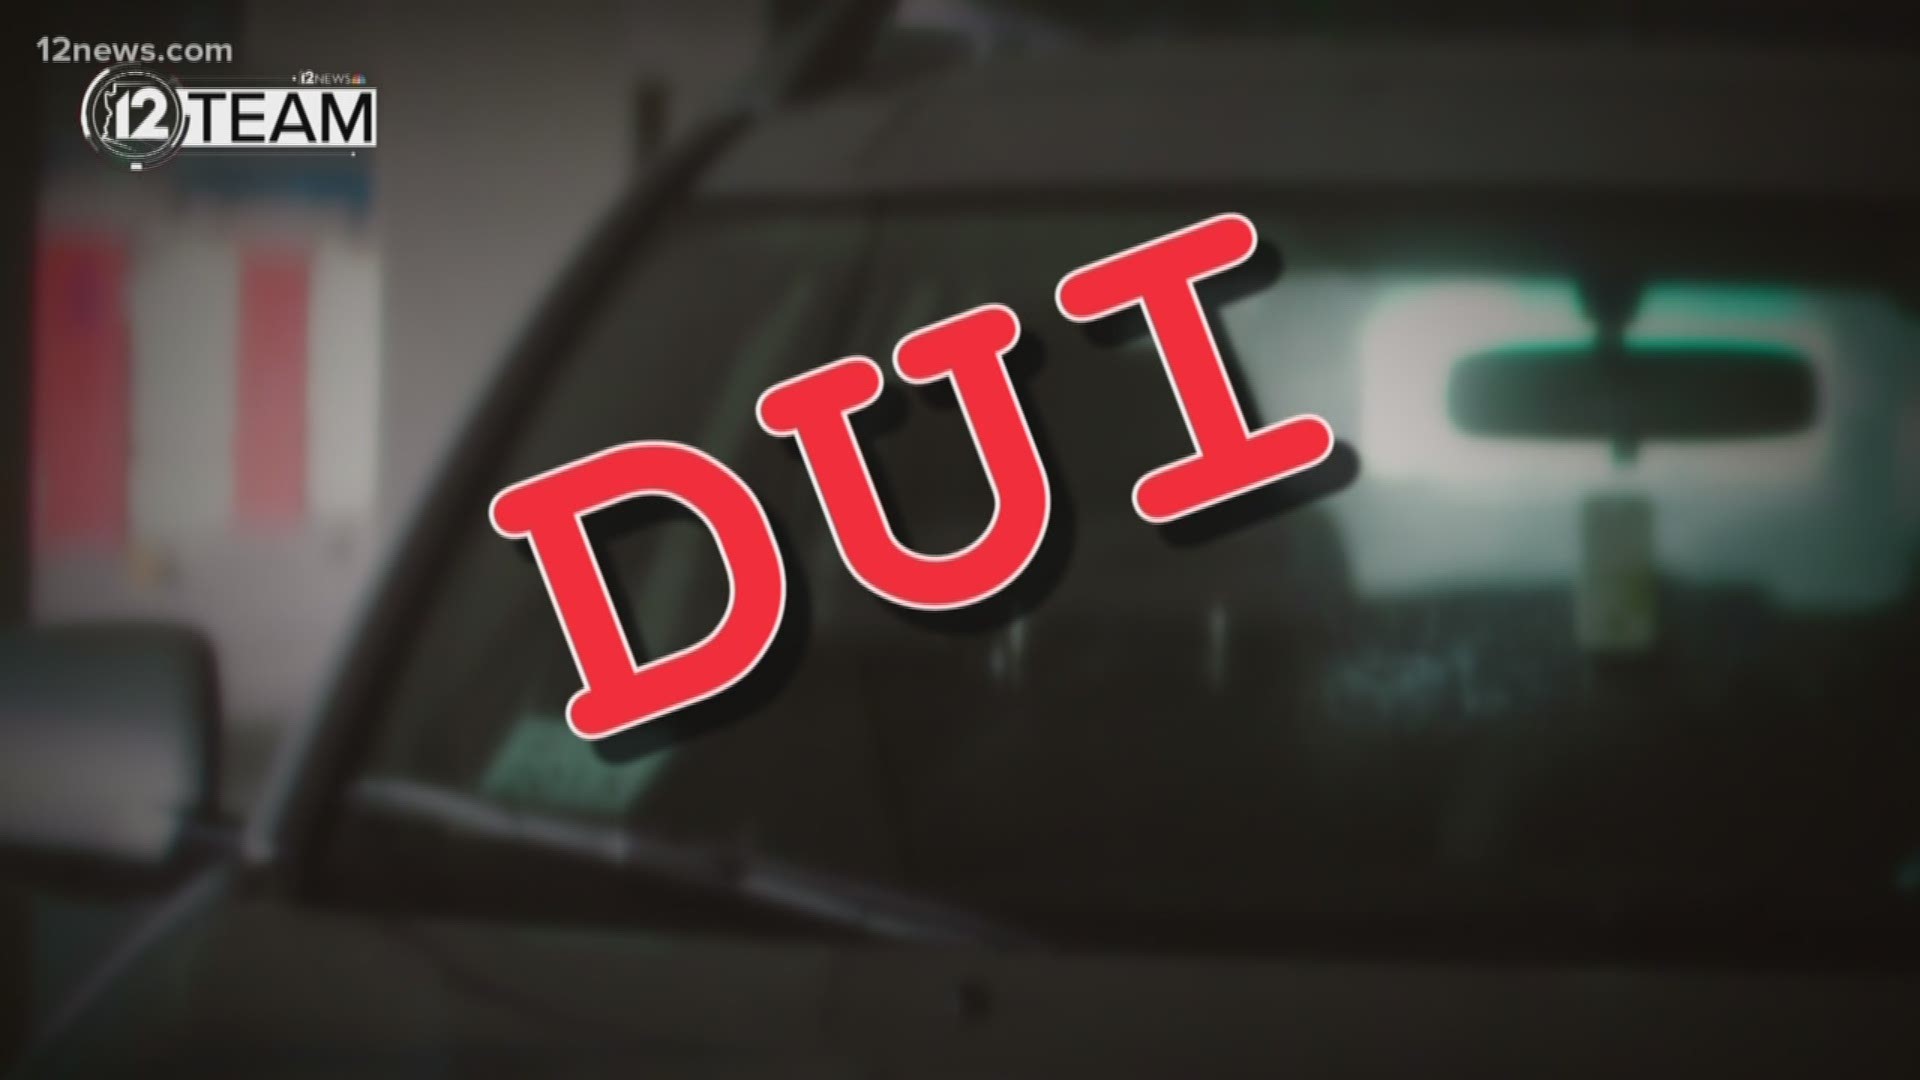 Arizona is known for having some of the toughest DUI laws, and they go beyond drinking and driving a car.